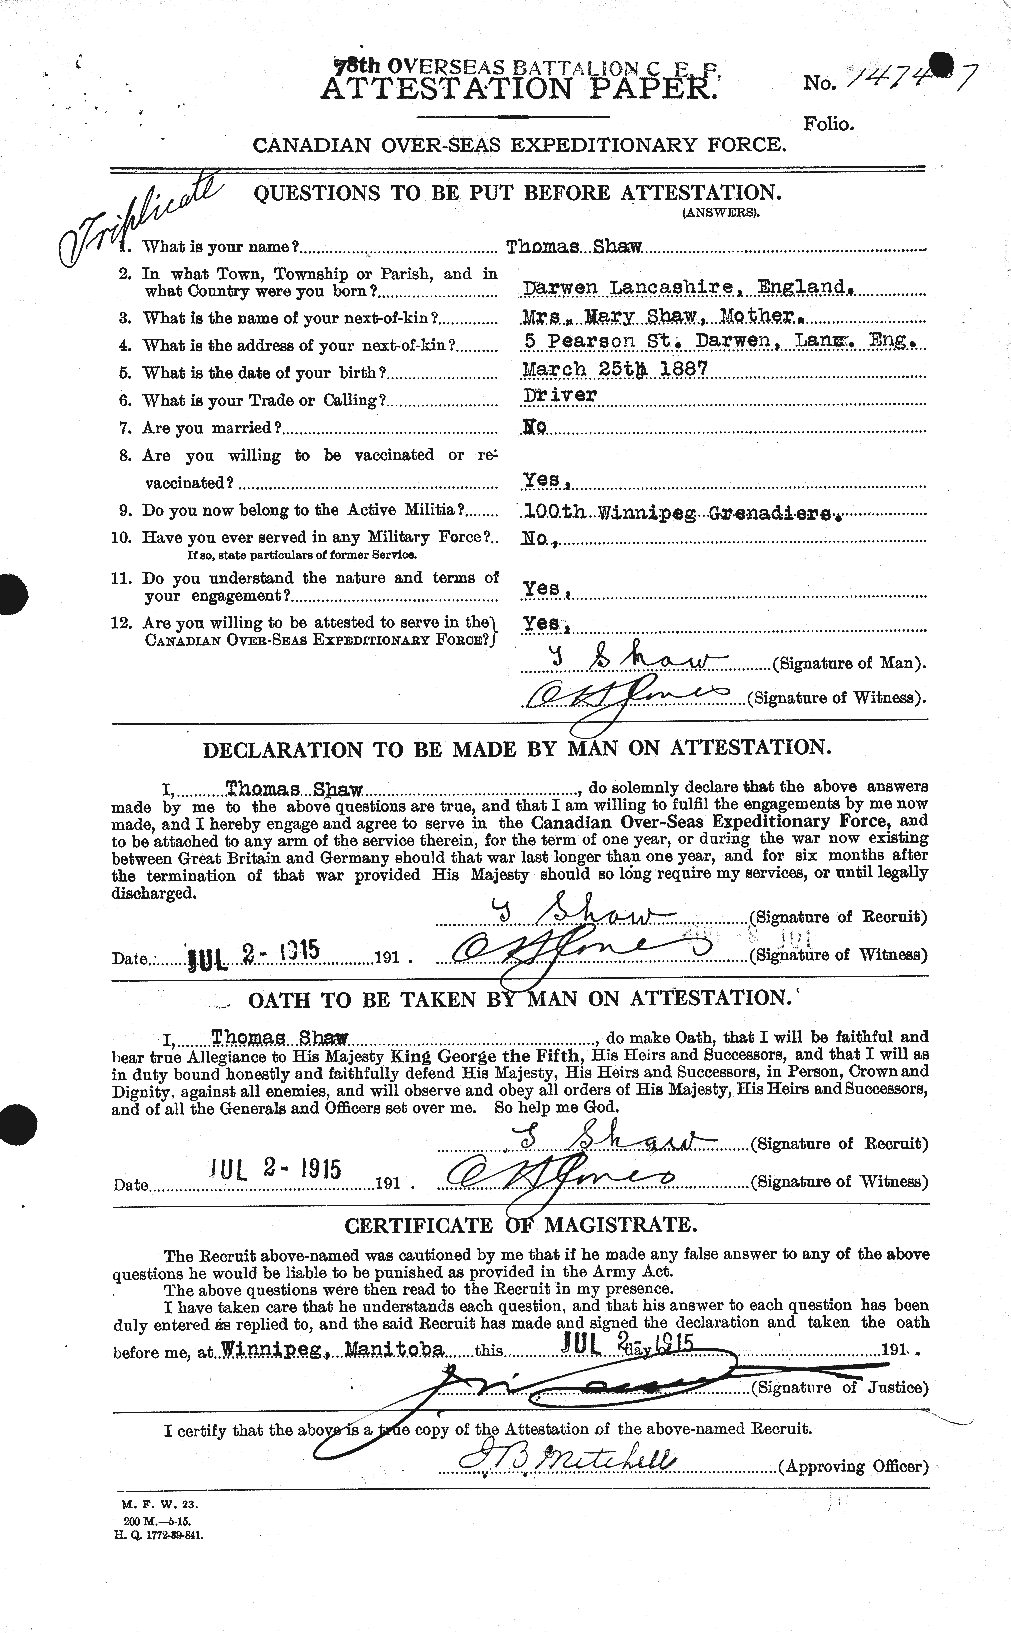 Personnel Records of the First World War - CEF 089619a